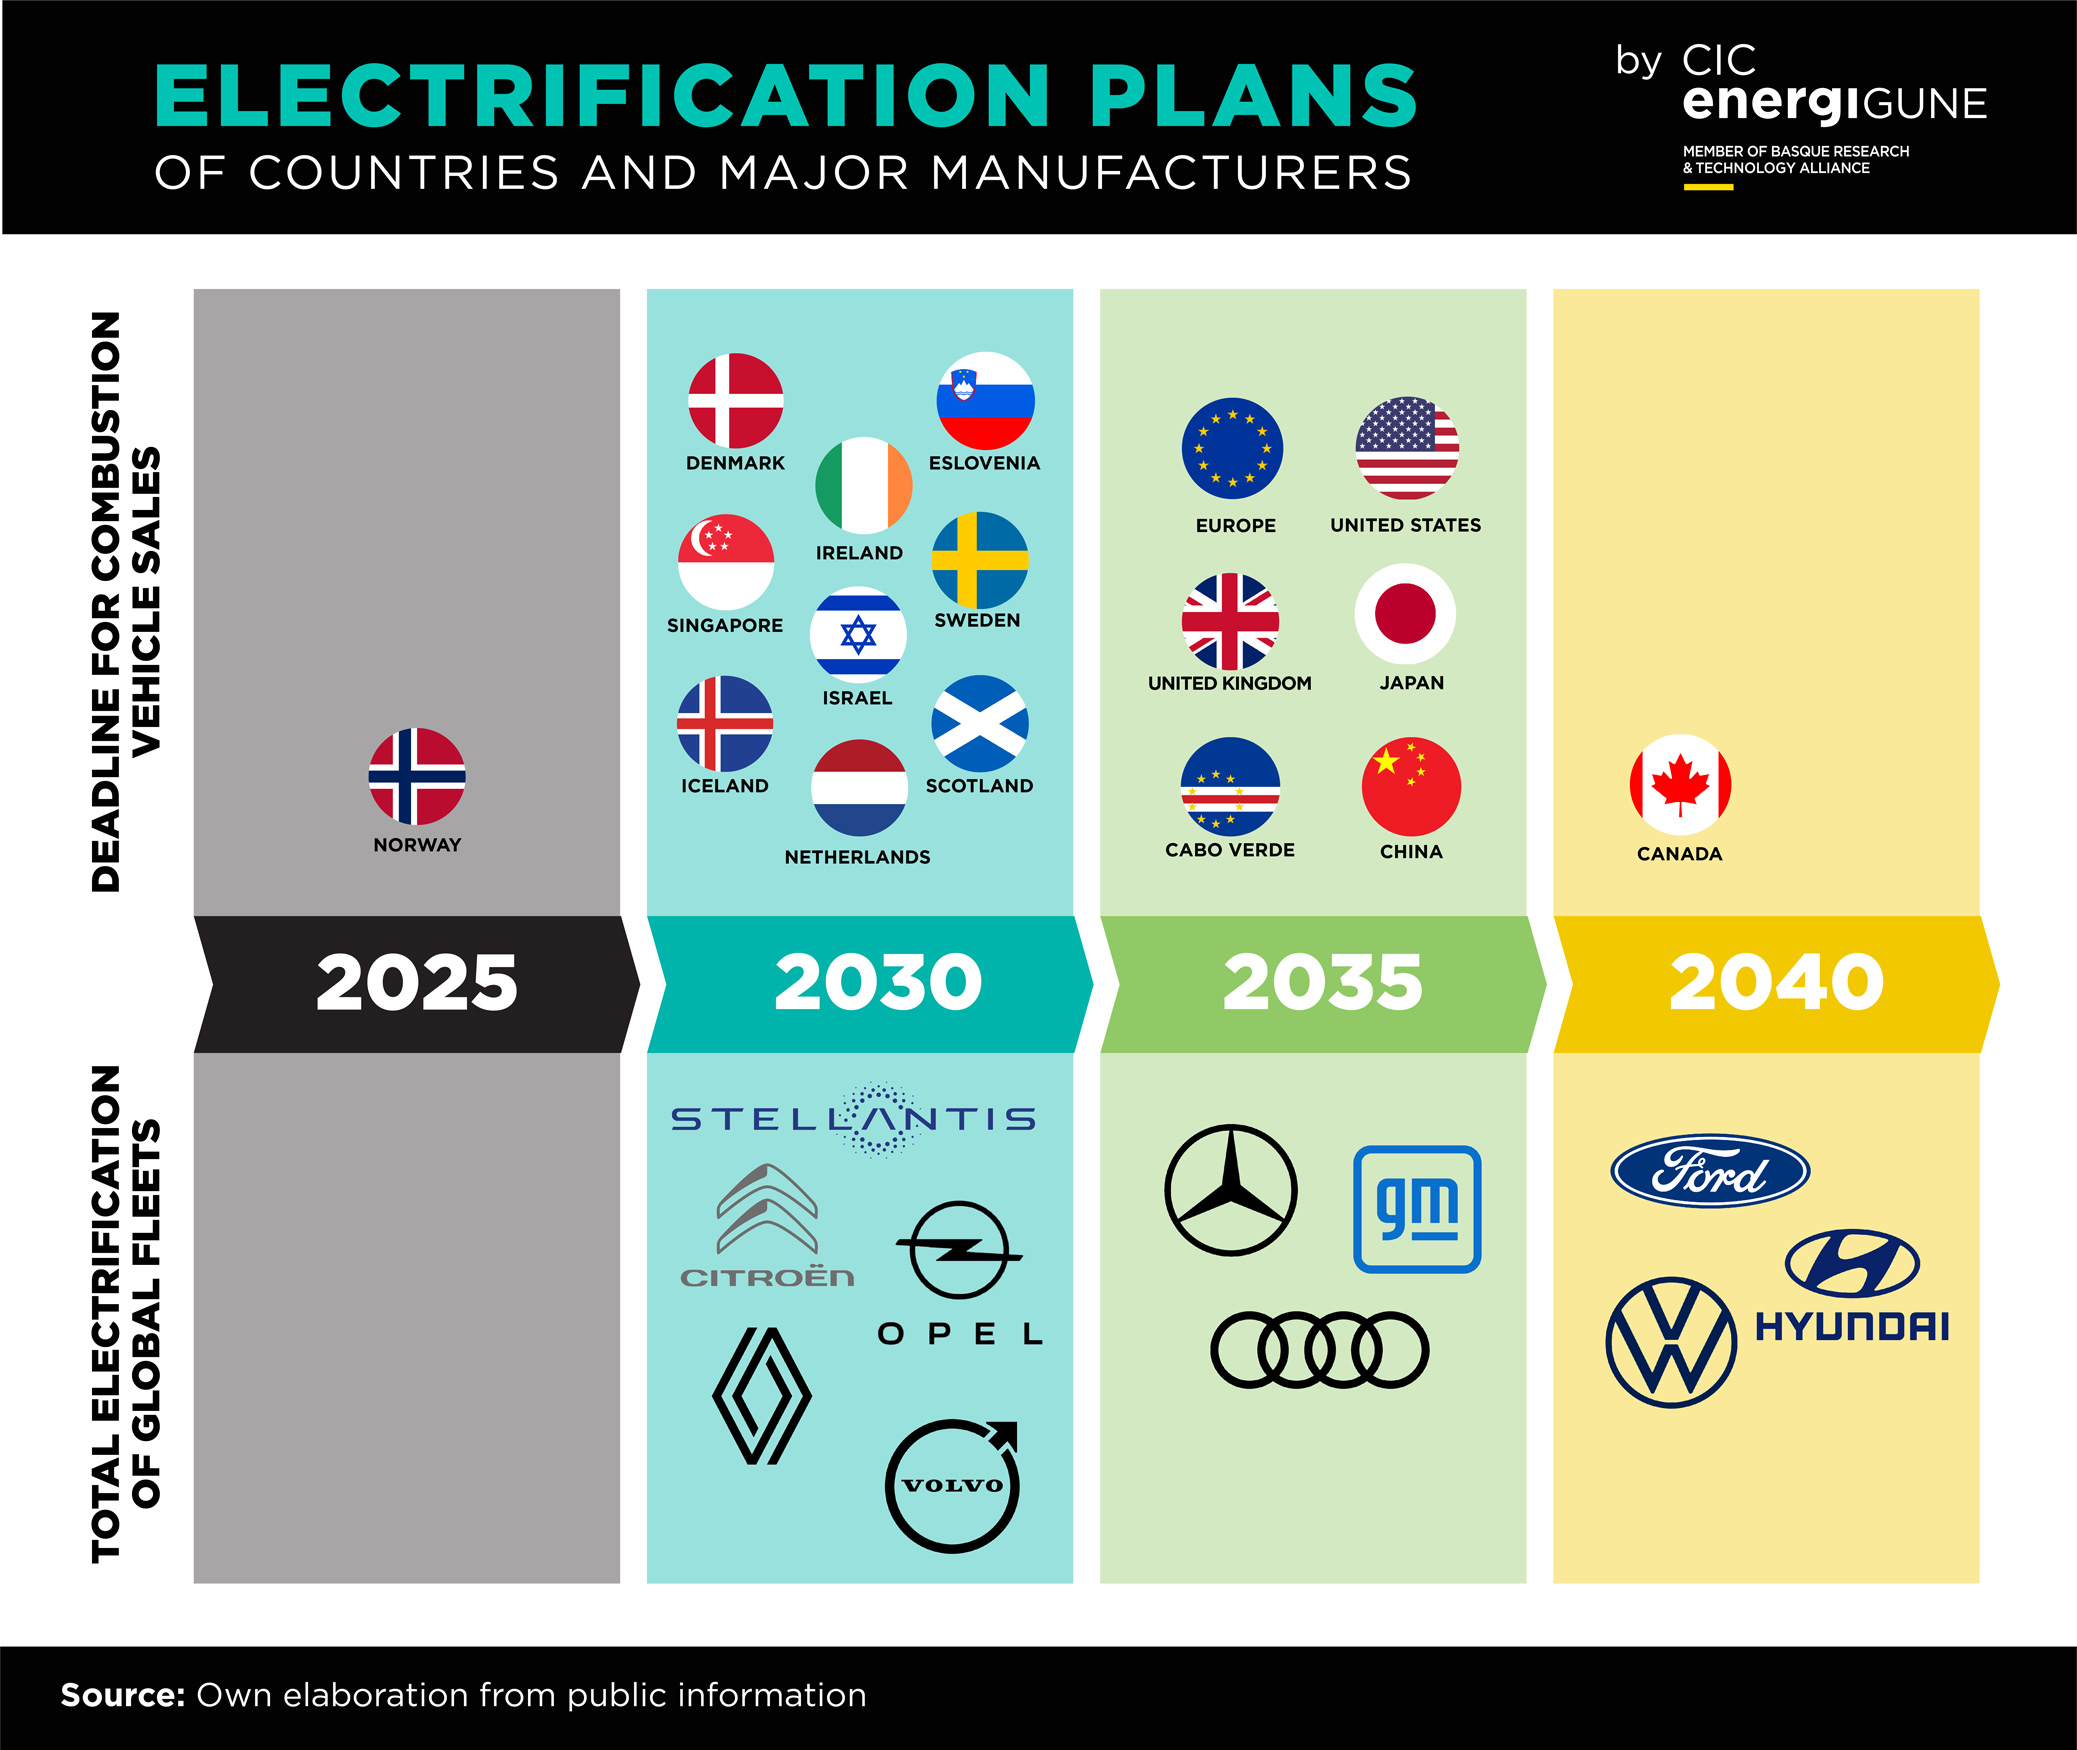 Chart developed by CIC energiGUNE based on public information that reveals the electrification plans of countries, continents and major car manufacturers for 2025, 2030, 2035 and 2040